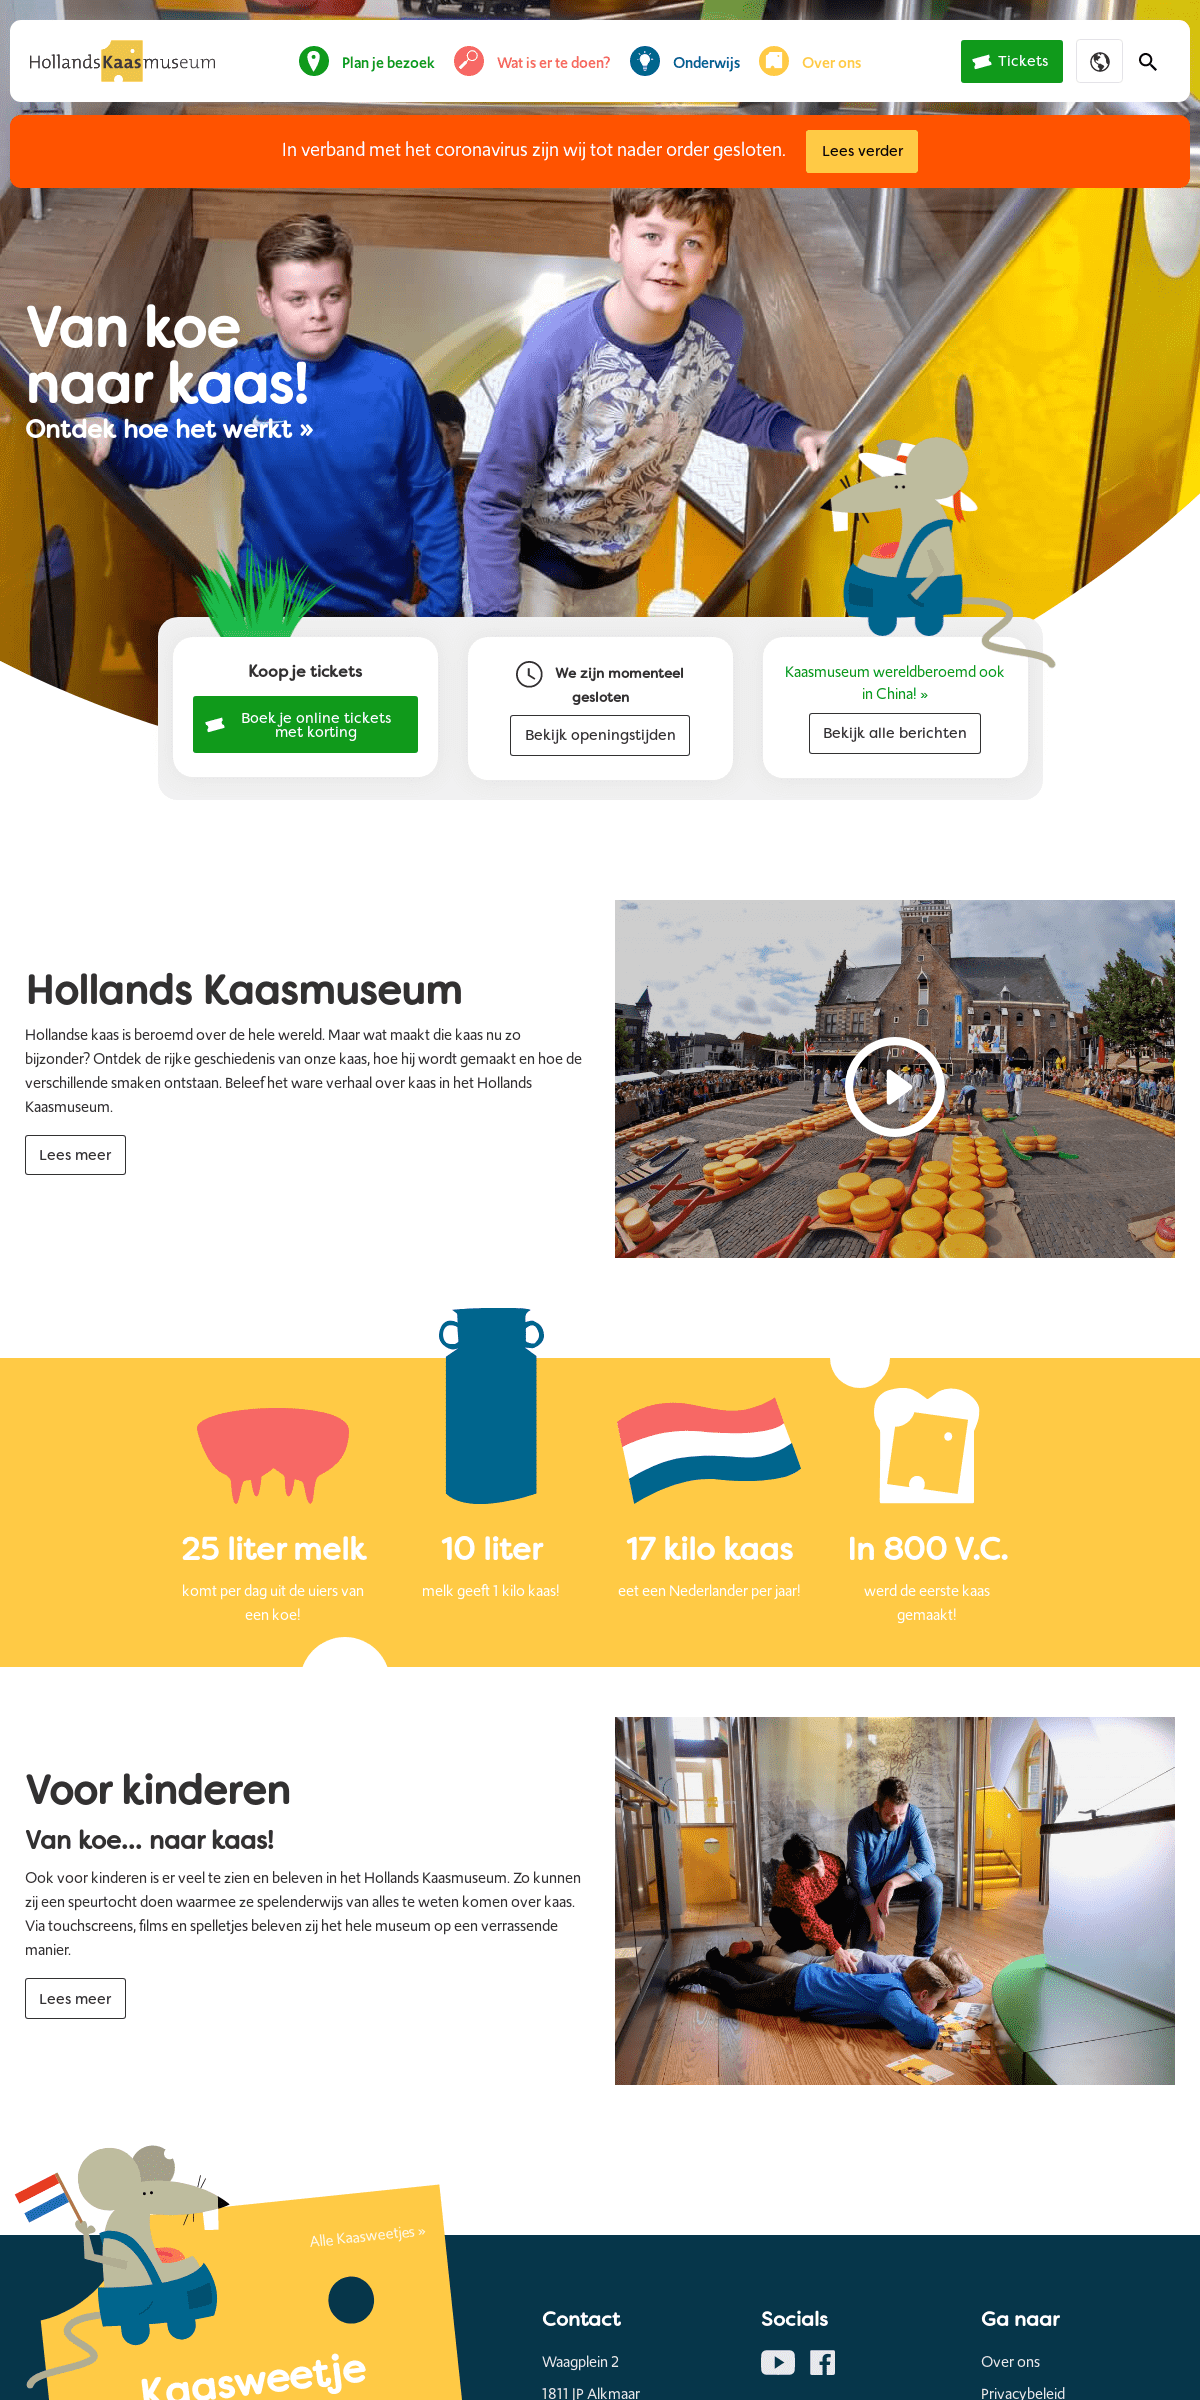 A complete backup of kaasmuseum.nl